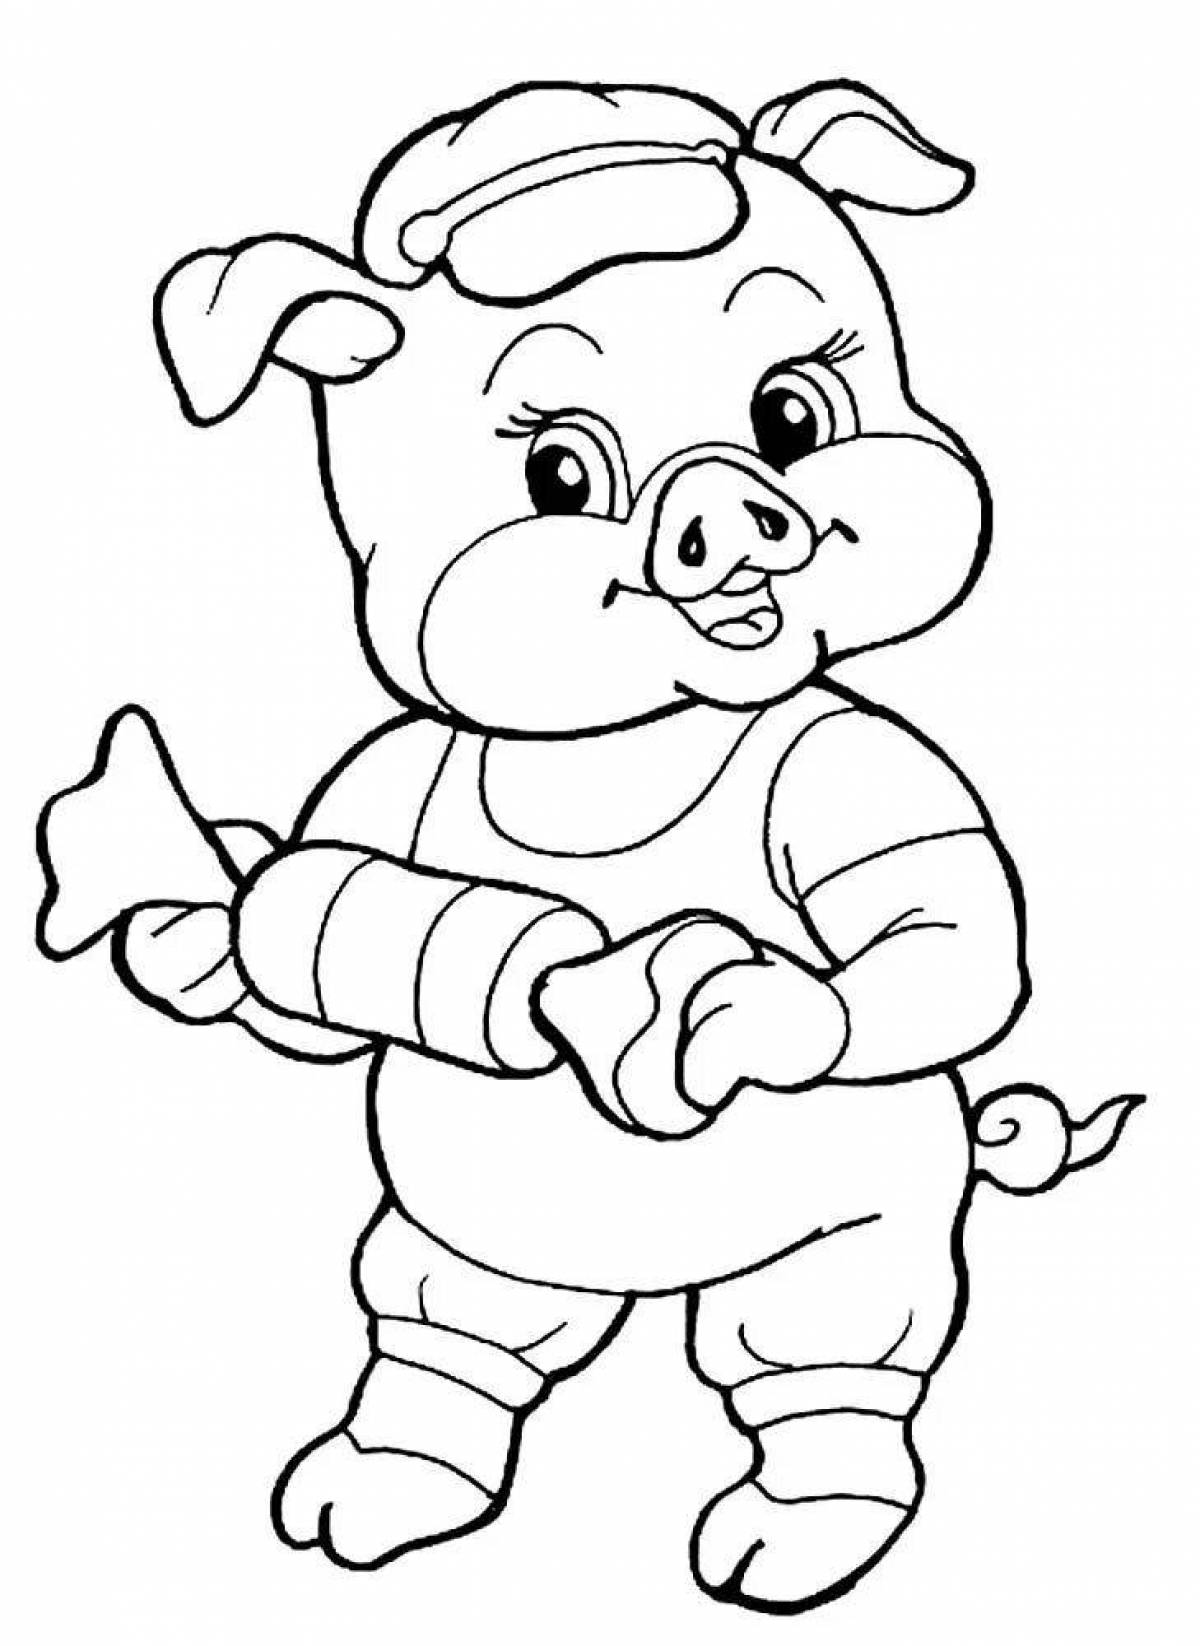 Giggly coloring pig for kids